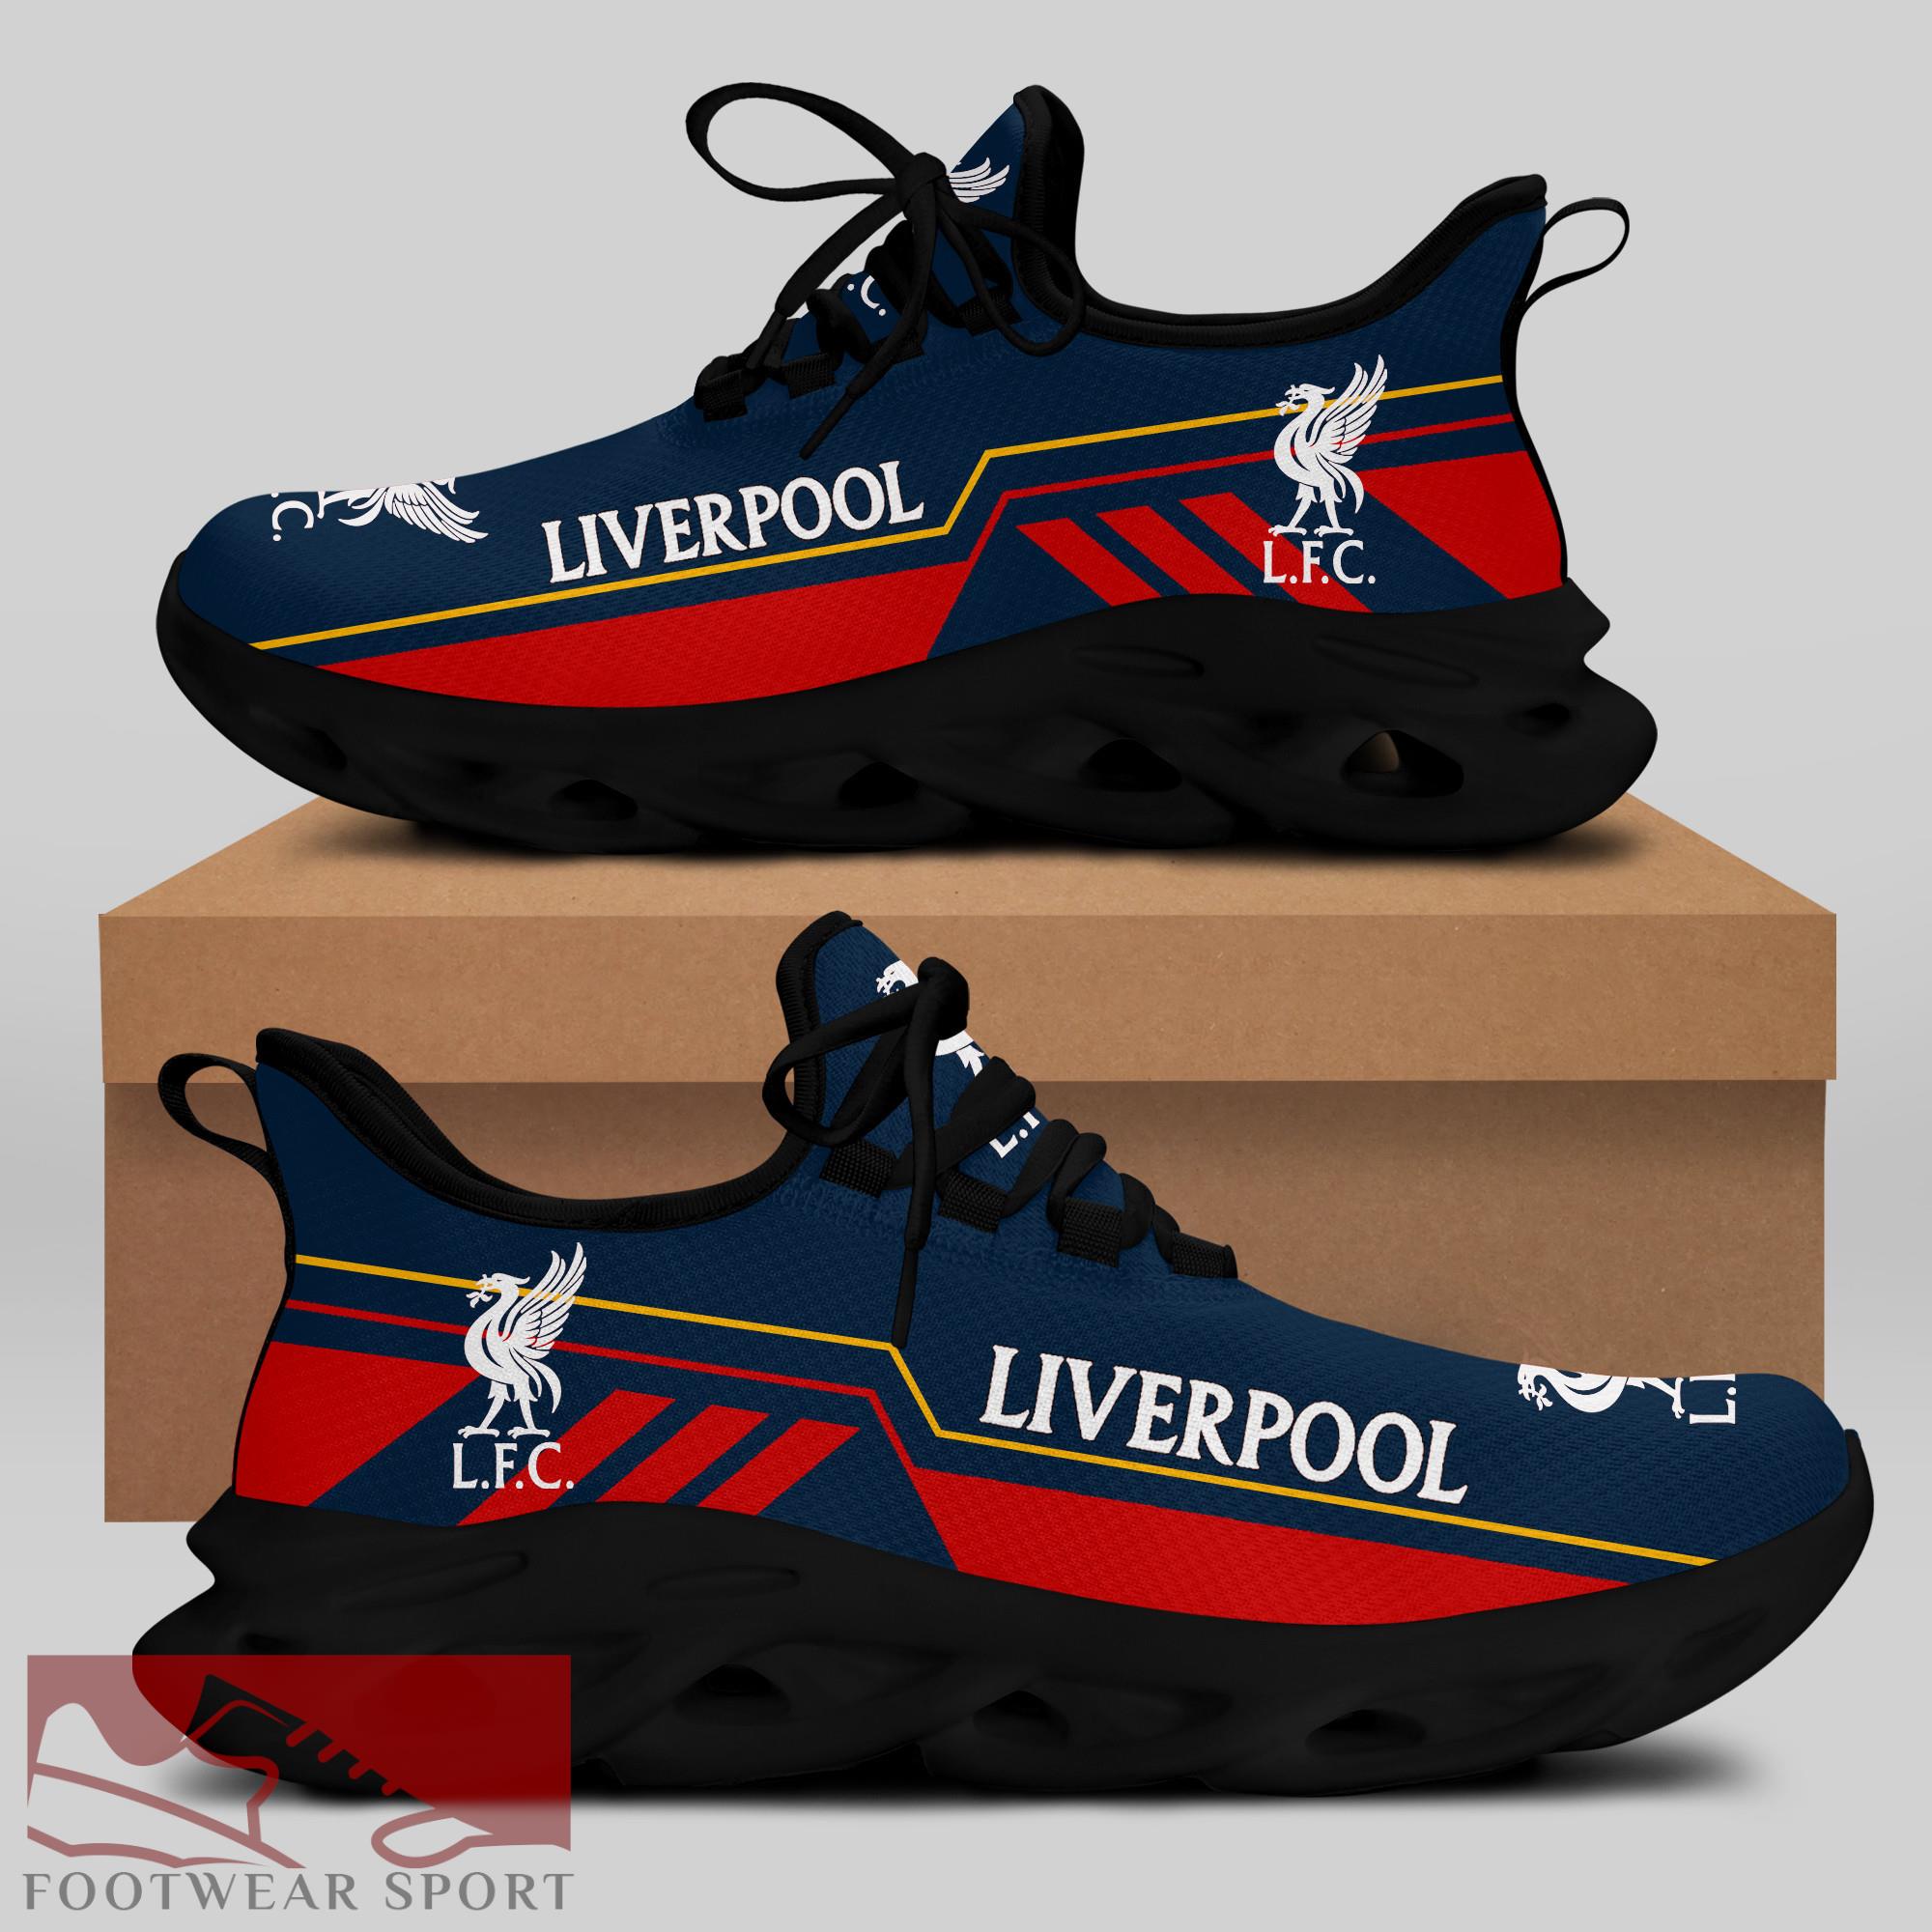 Liverpool FC Fans EPL Chunky Sneakers Versatile Max Soul Shoes For Men And Women - Liverpool FC Chunky Sneakers White Black Max Soul Shoes For Men And Women Photo 1